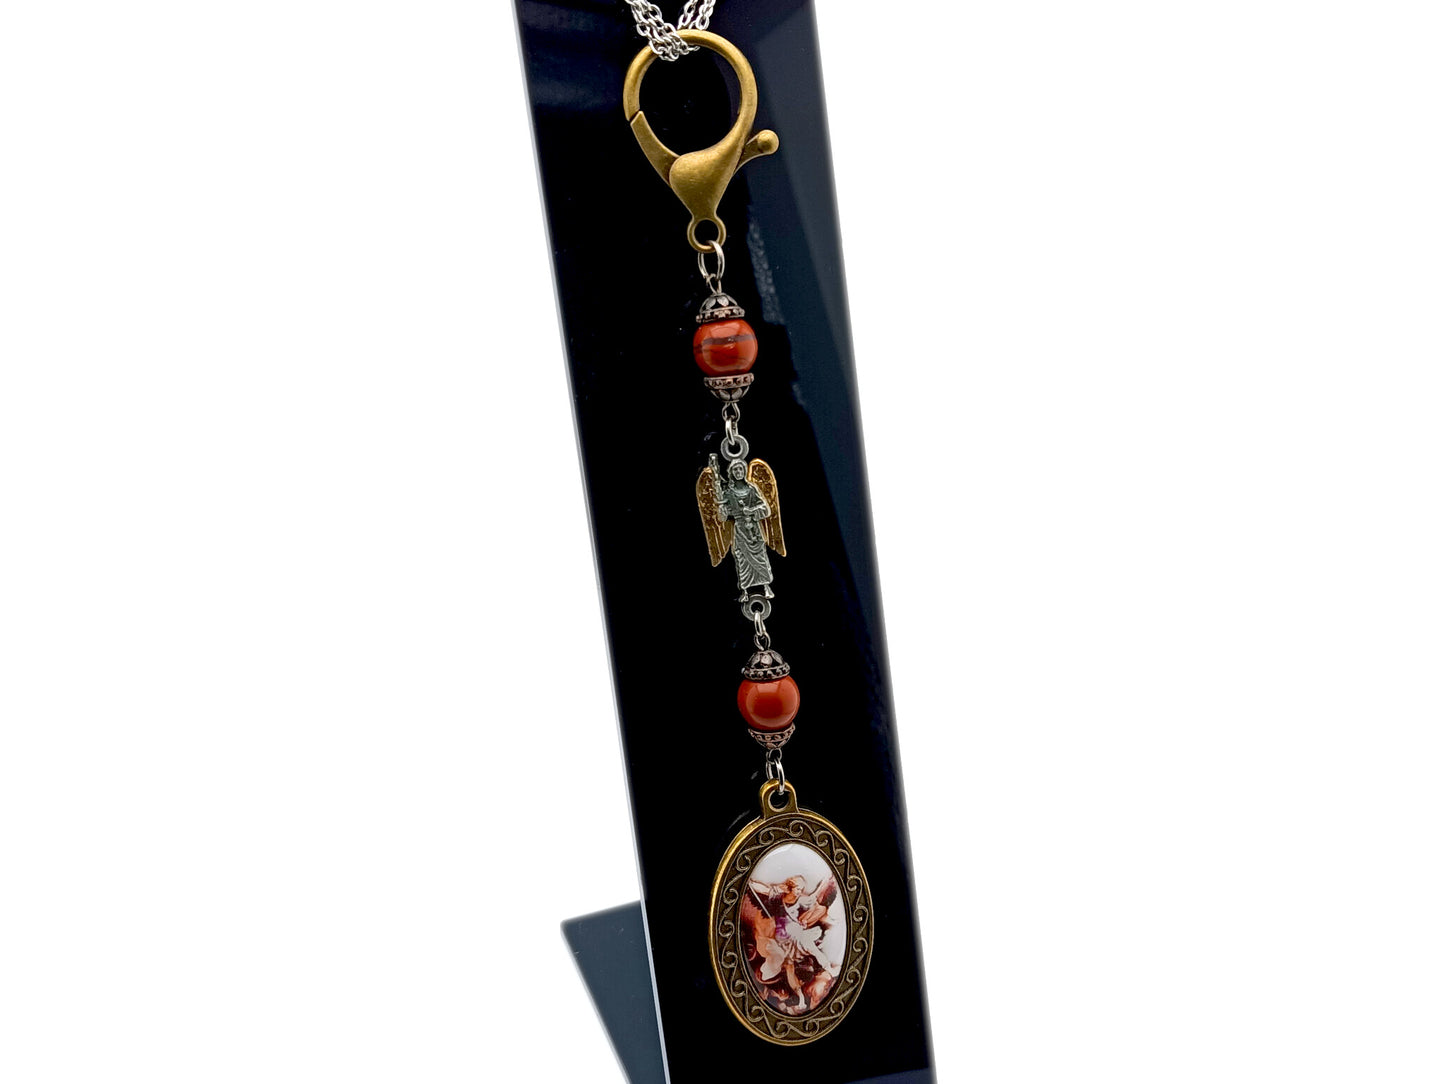 Saint Michael unique rosary beads purse clip key chain with red jasper beads, Angel linking medal and Saint Michael picture medal.